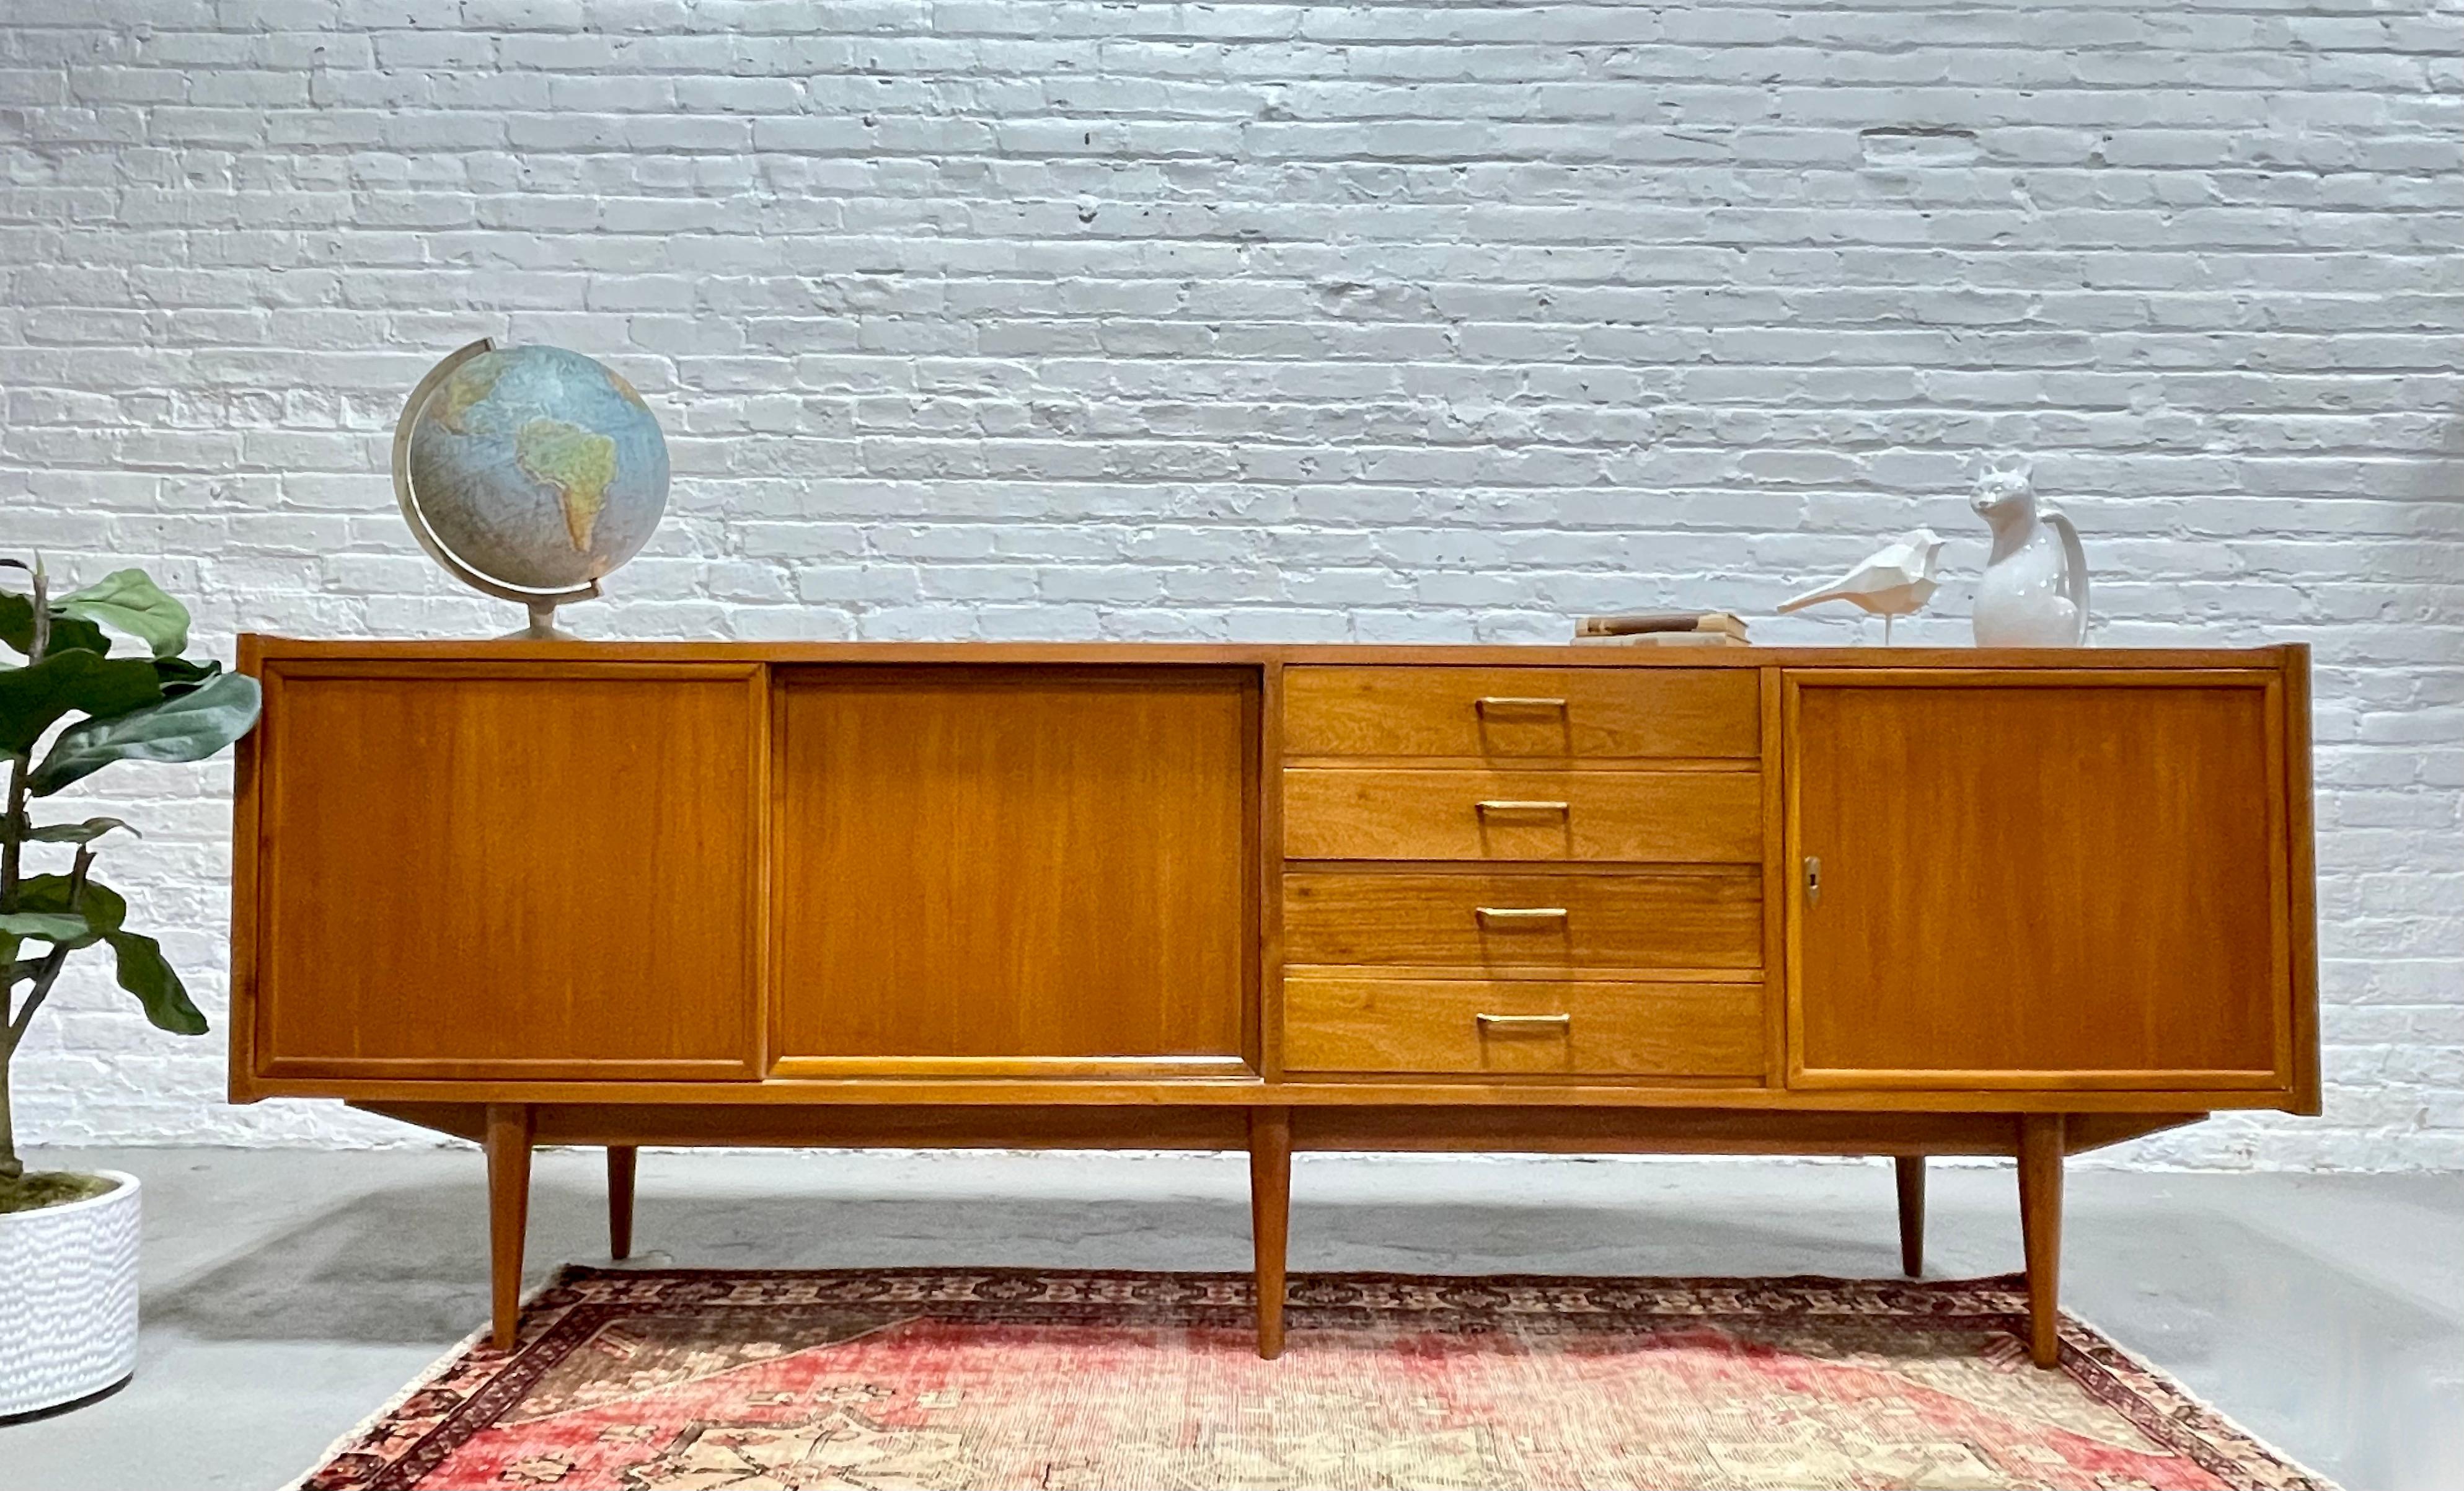 EXTRA LONG and just plain “EXTRA” in every sense. This Mid Century Modern Italian credenza, c. 1955, is an absolute showstopper, boasting simple yet classic styling with brass hand pulls, long tapered legs and lovely butterscotch coloring. Along